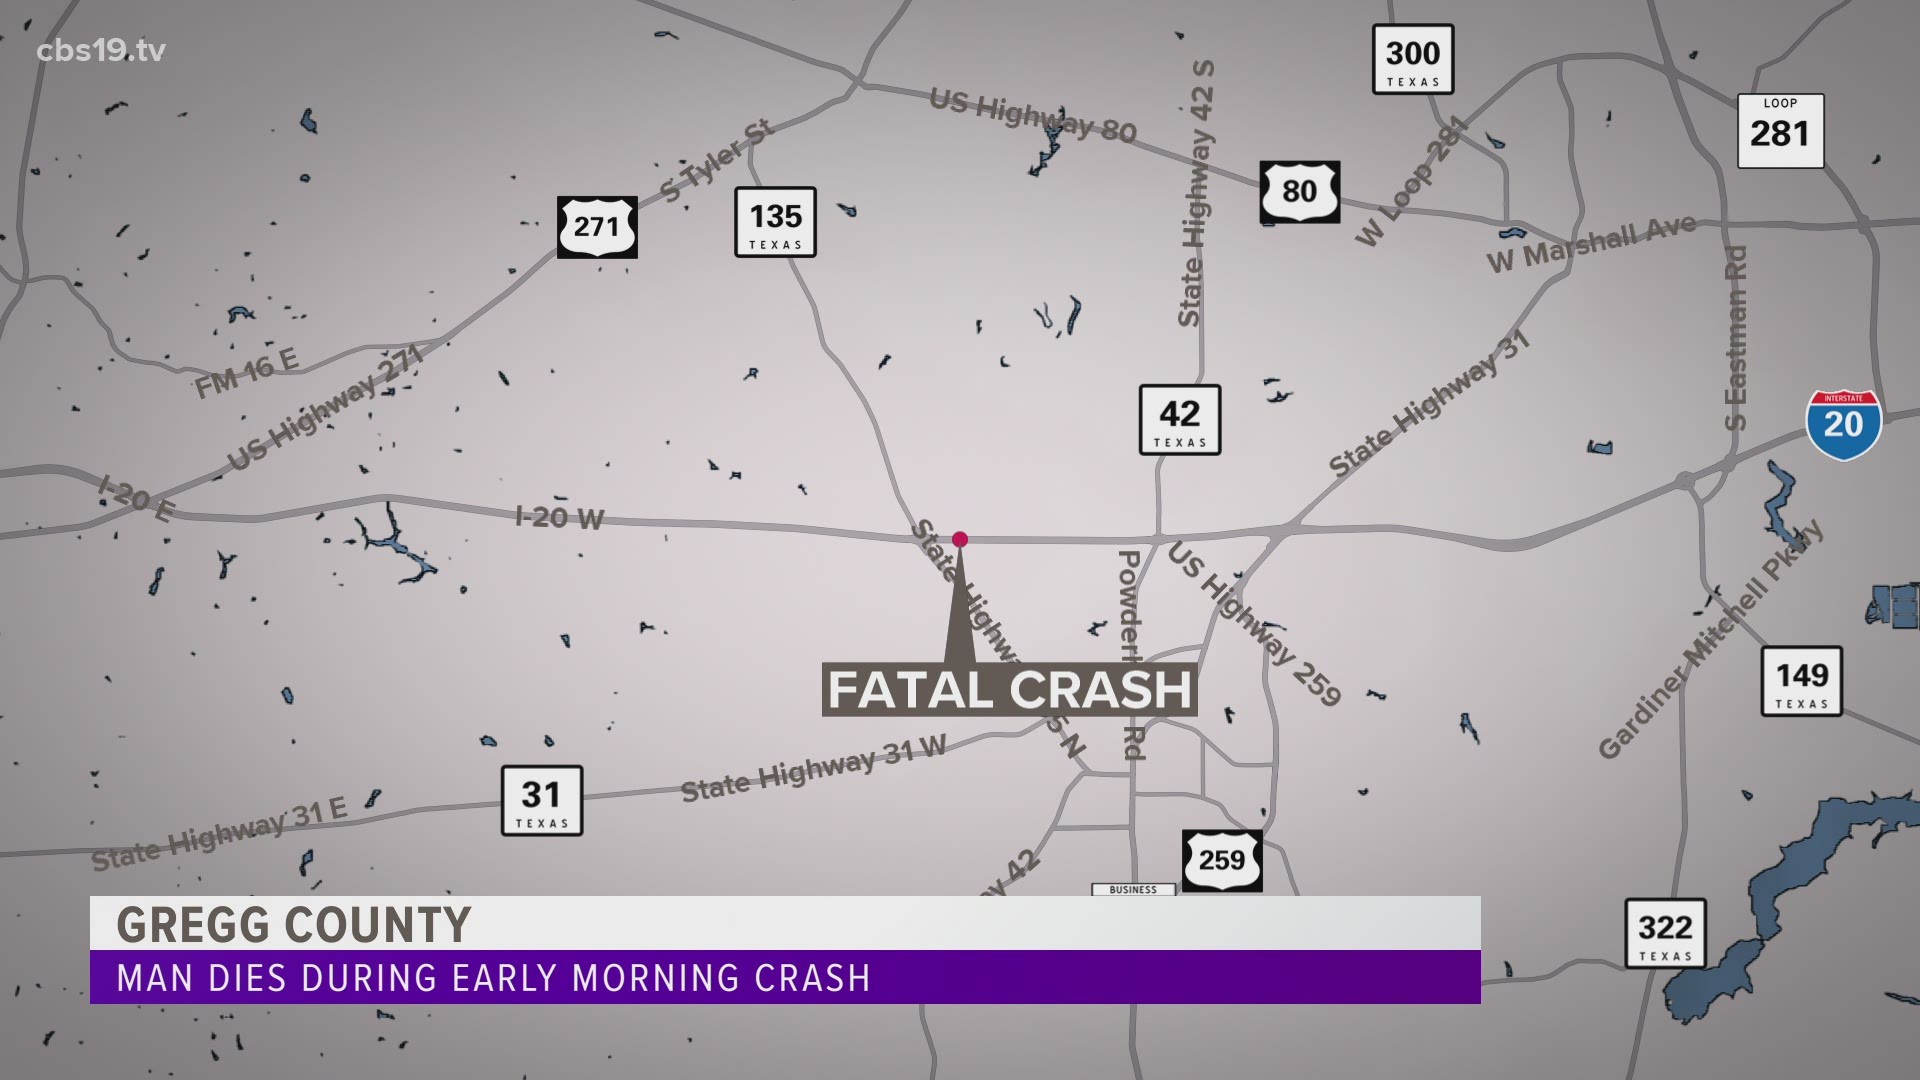 Troopers investigated an early morning fatal accident in Gregg County.